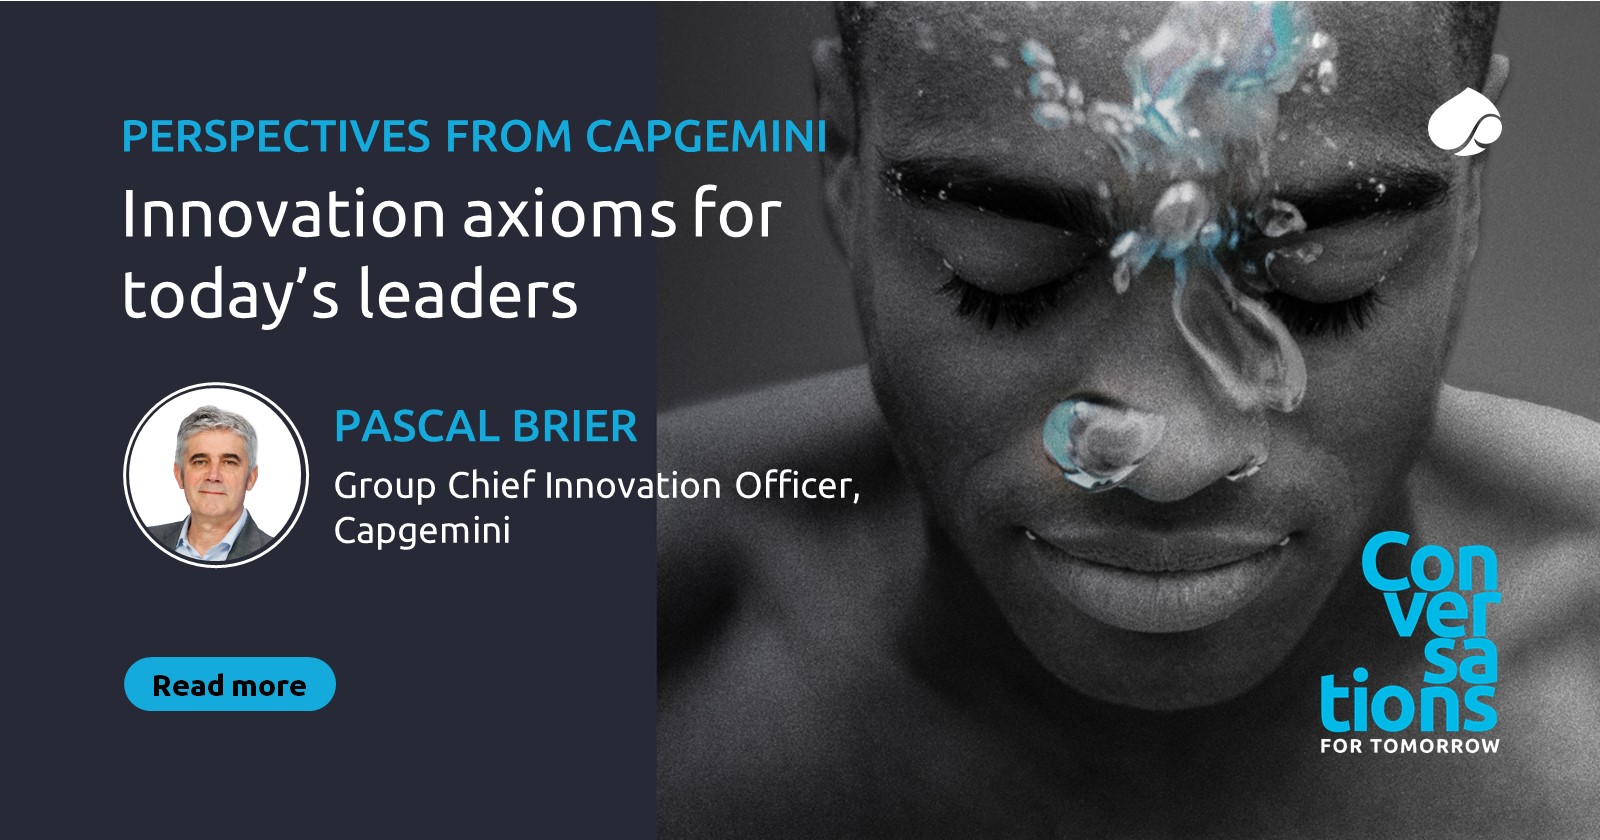 Perspective from Capgemini: Innovation axioms for today's leaders